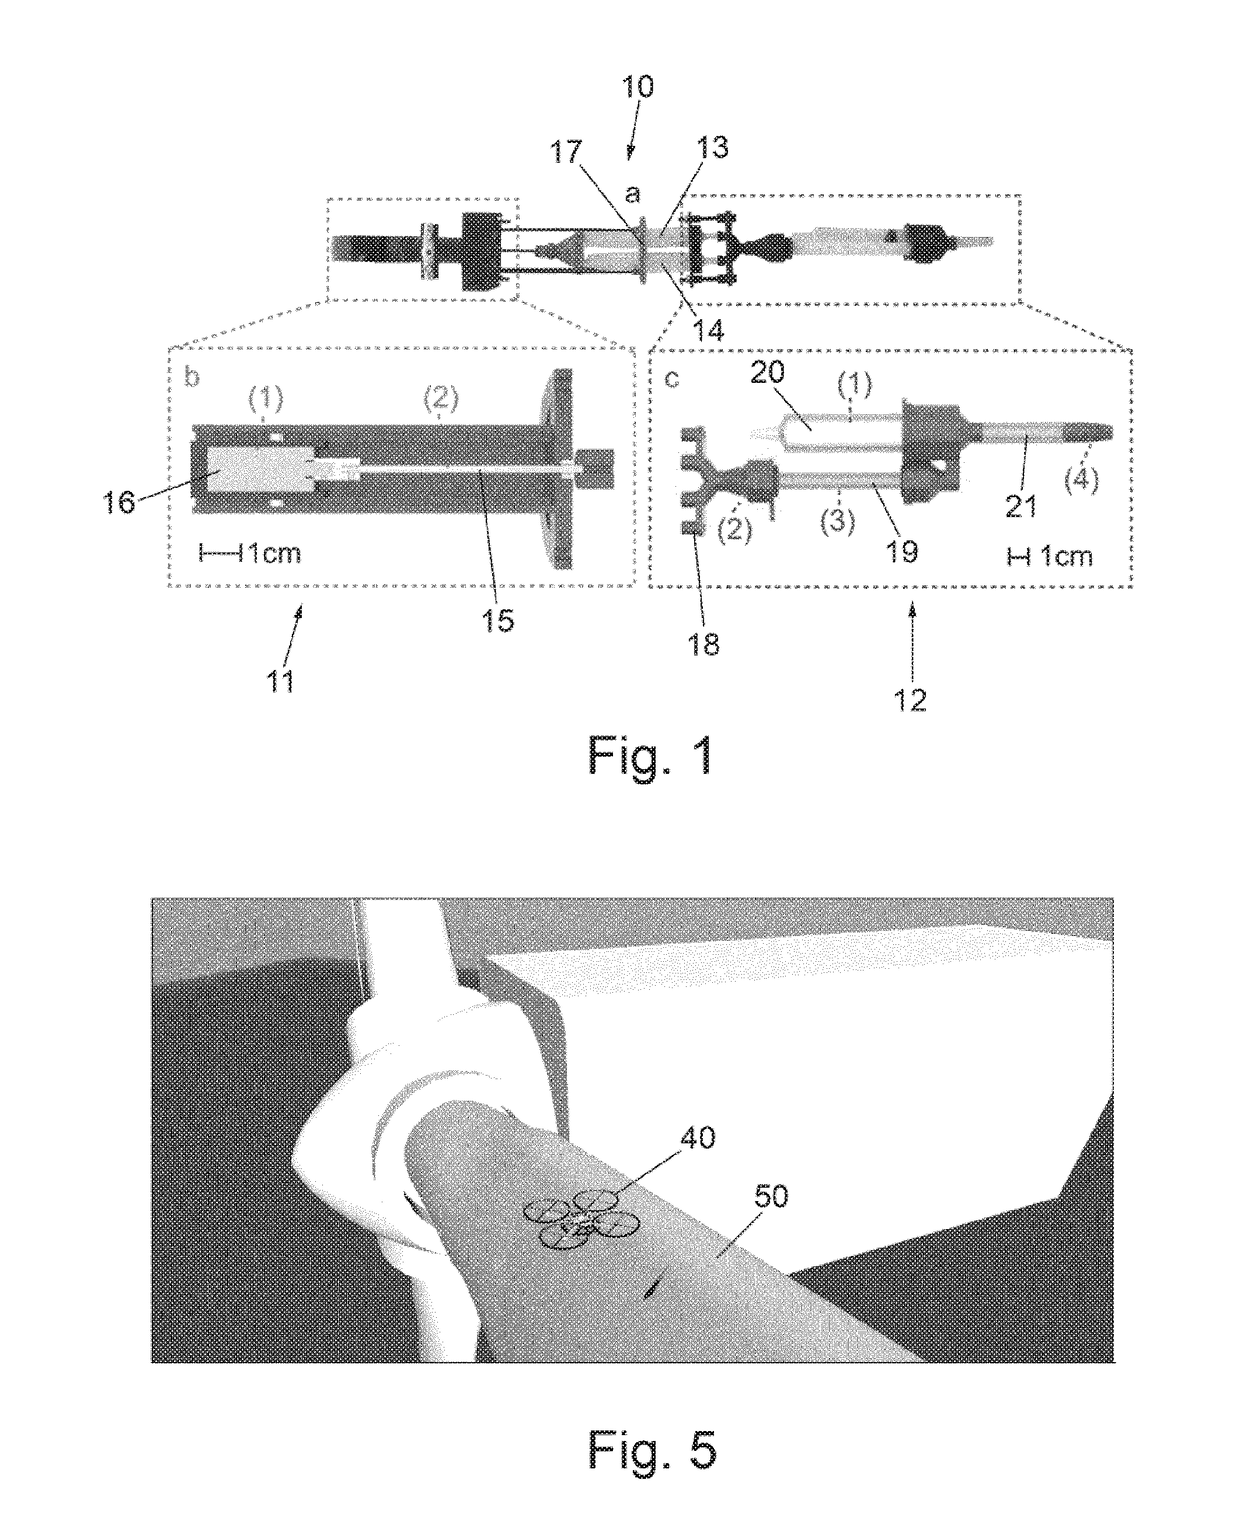 Method of Using a Device Capable Of Controlled Flight